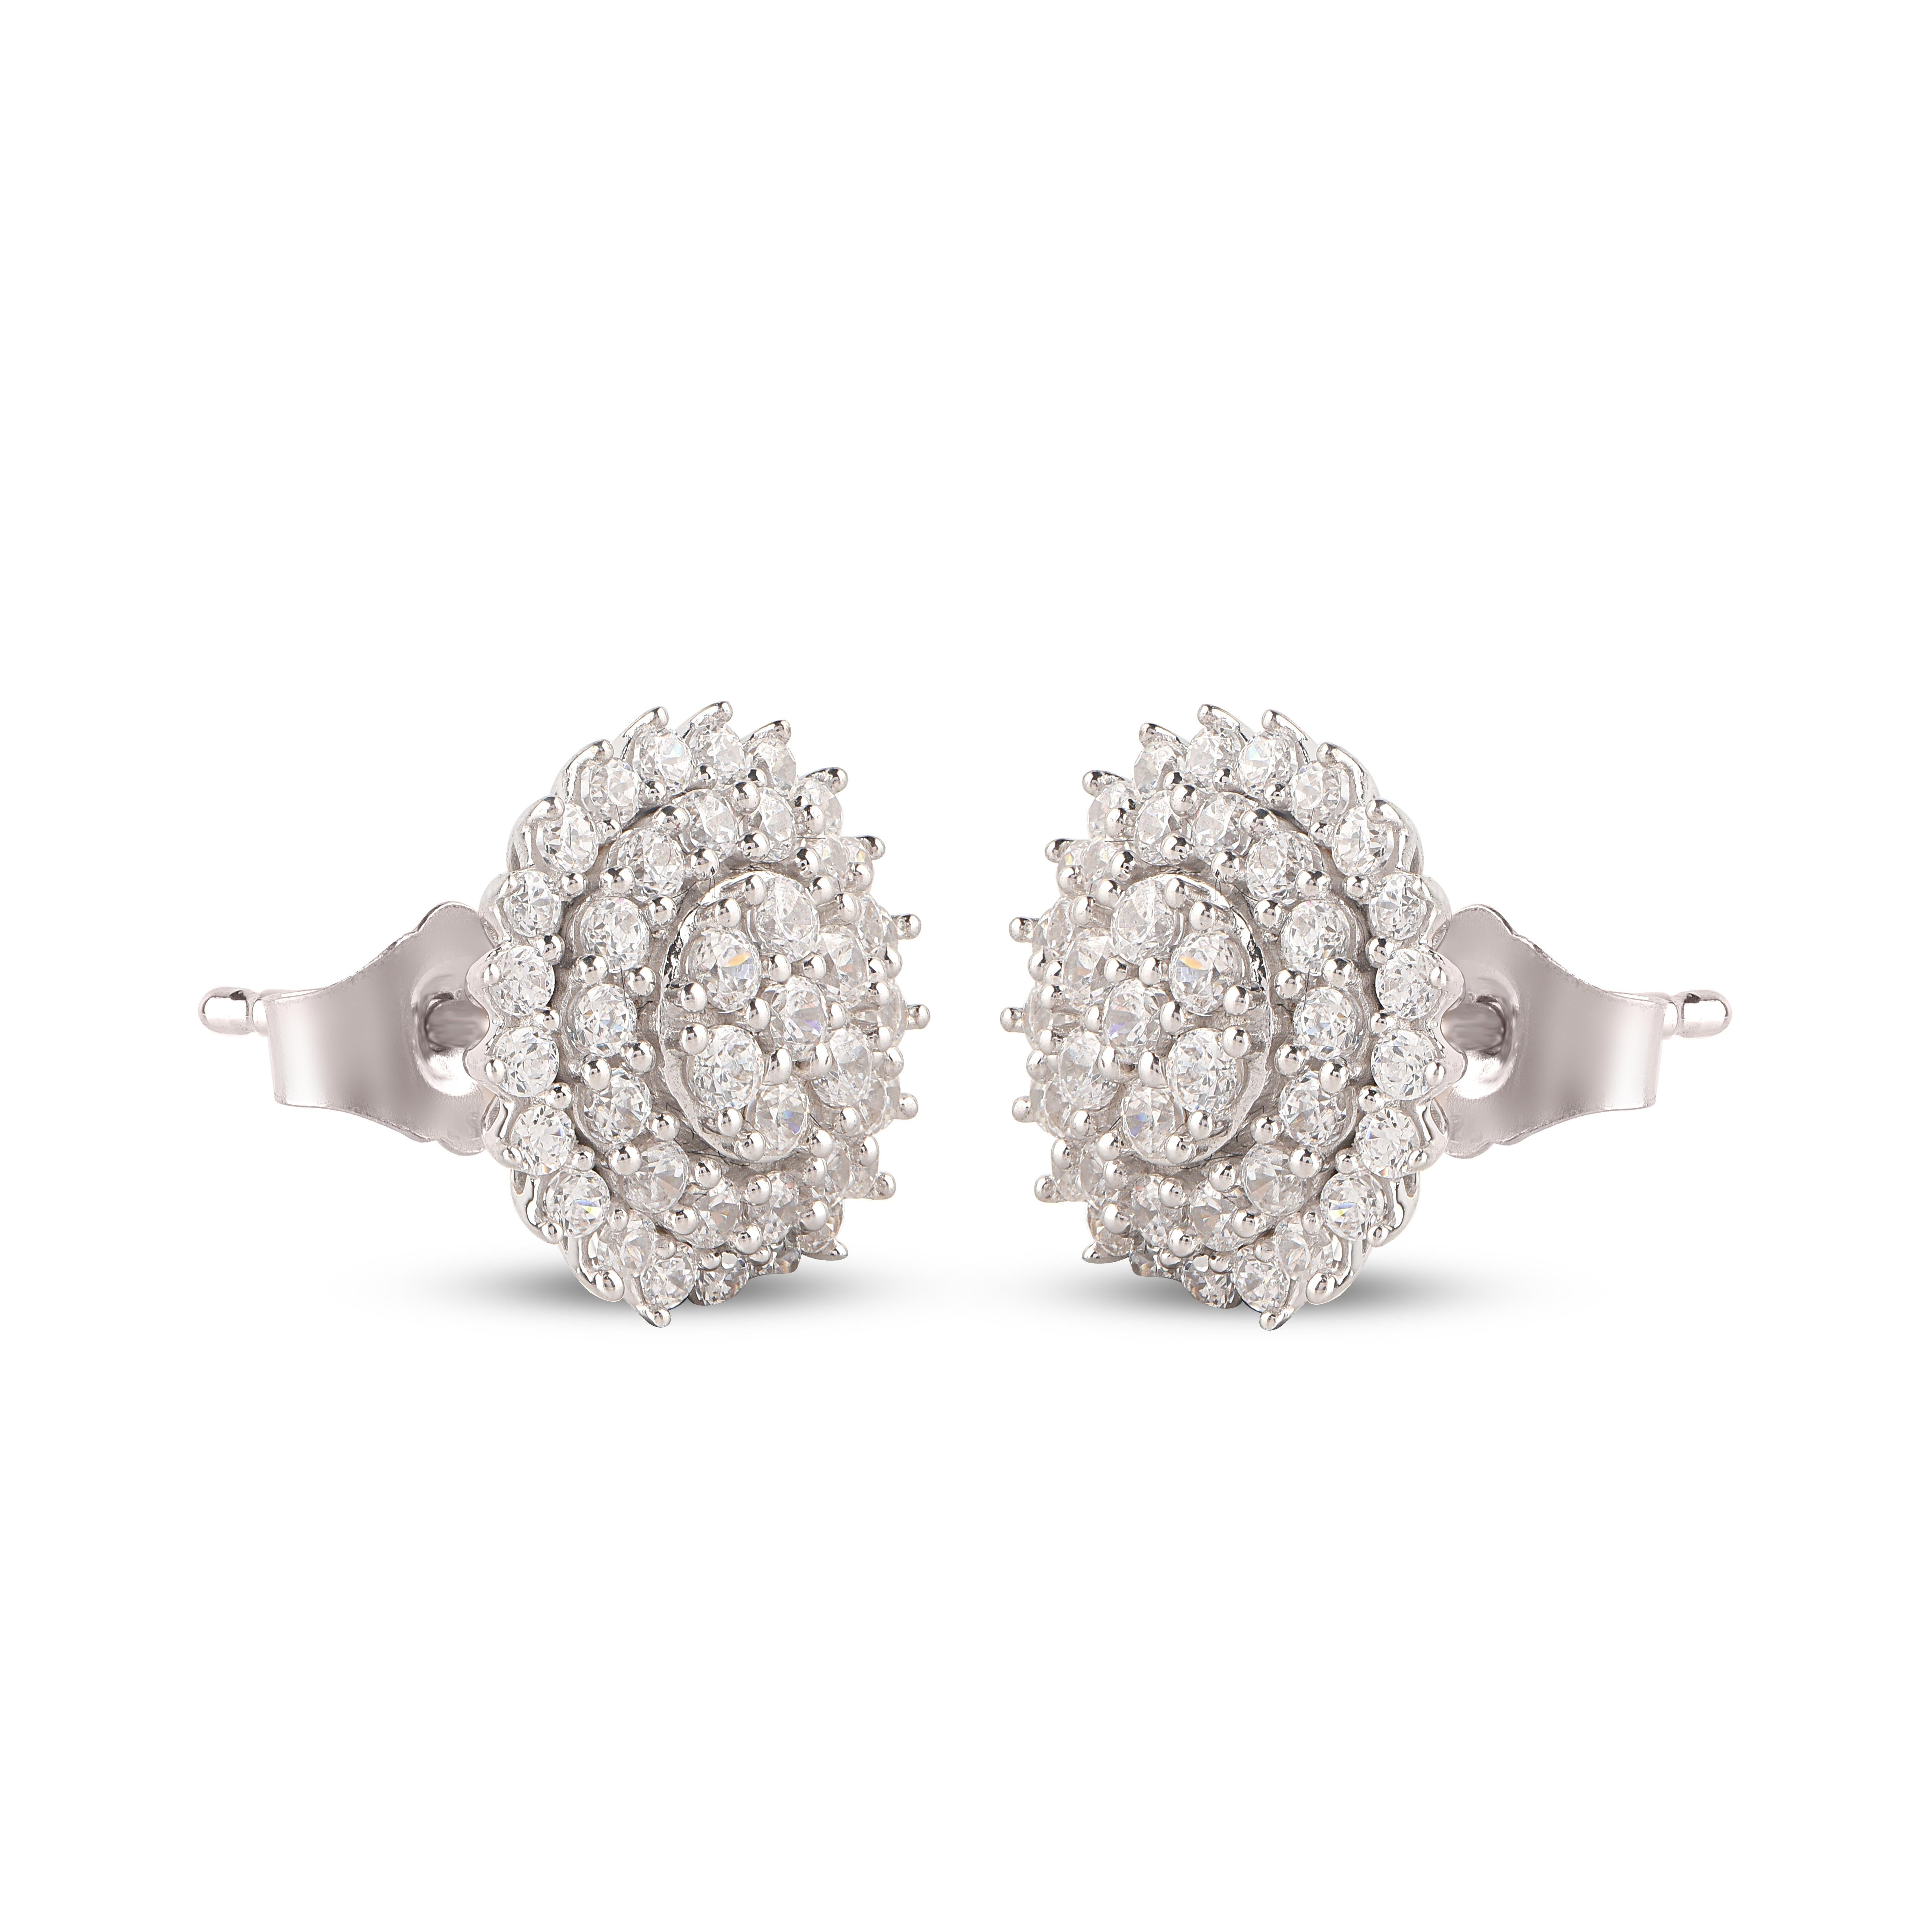 Blooming with sparkle, these dazzling diamond floral stud earrings are embellished with 84 brilliant cut diamonds set in prong setting and designed in 18-karat white gold. The diamonds are graded H-I Color, I2 Clarity. 

They secure comfortably with